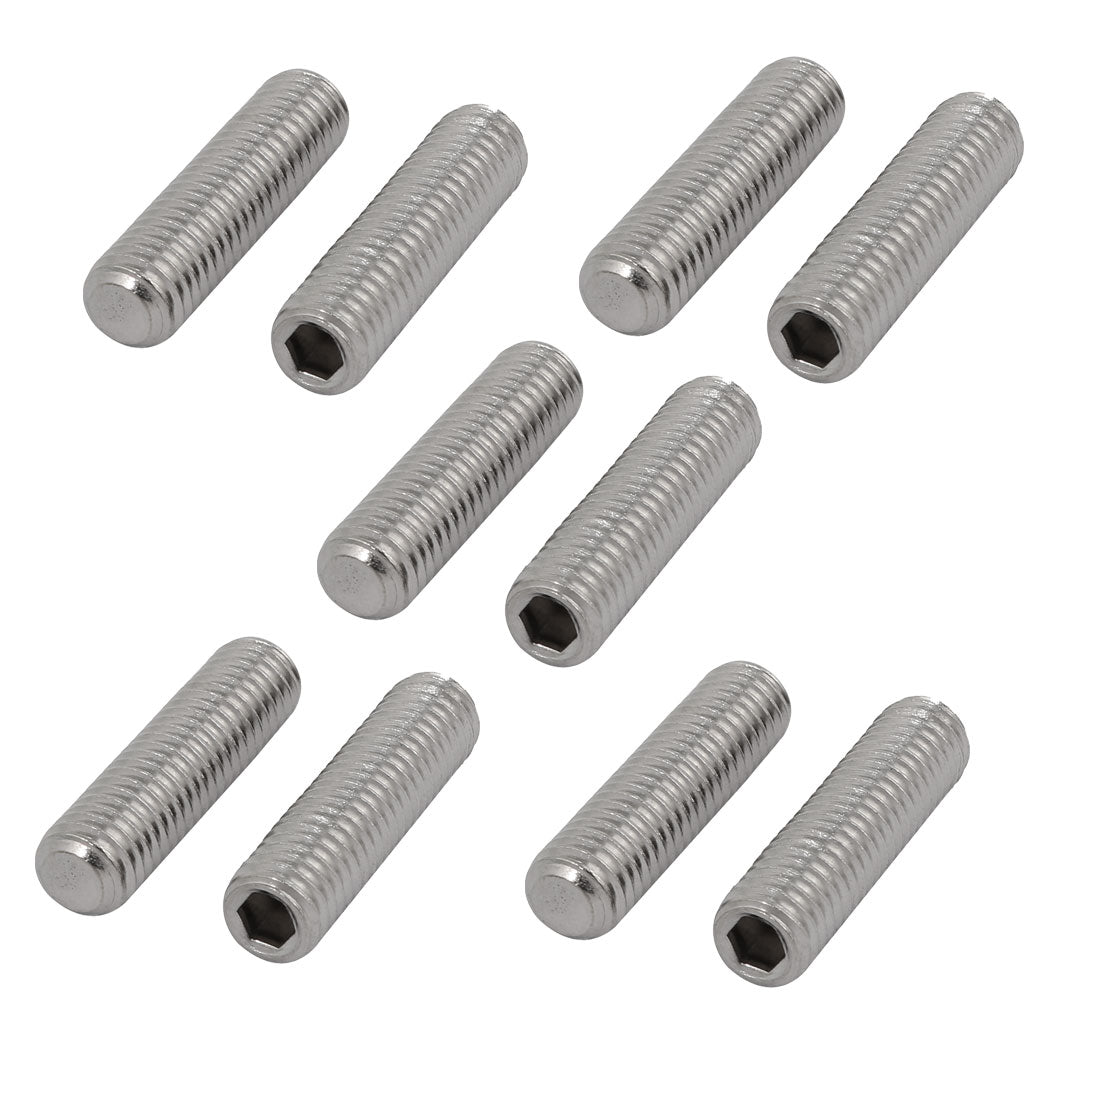 uxcell Uxcell 10 Pcs M8 x 30mm 304 Stainless Steel Hex Socket Drive Flat Point Grub Screw